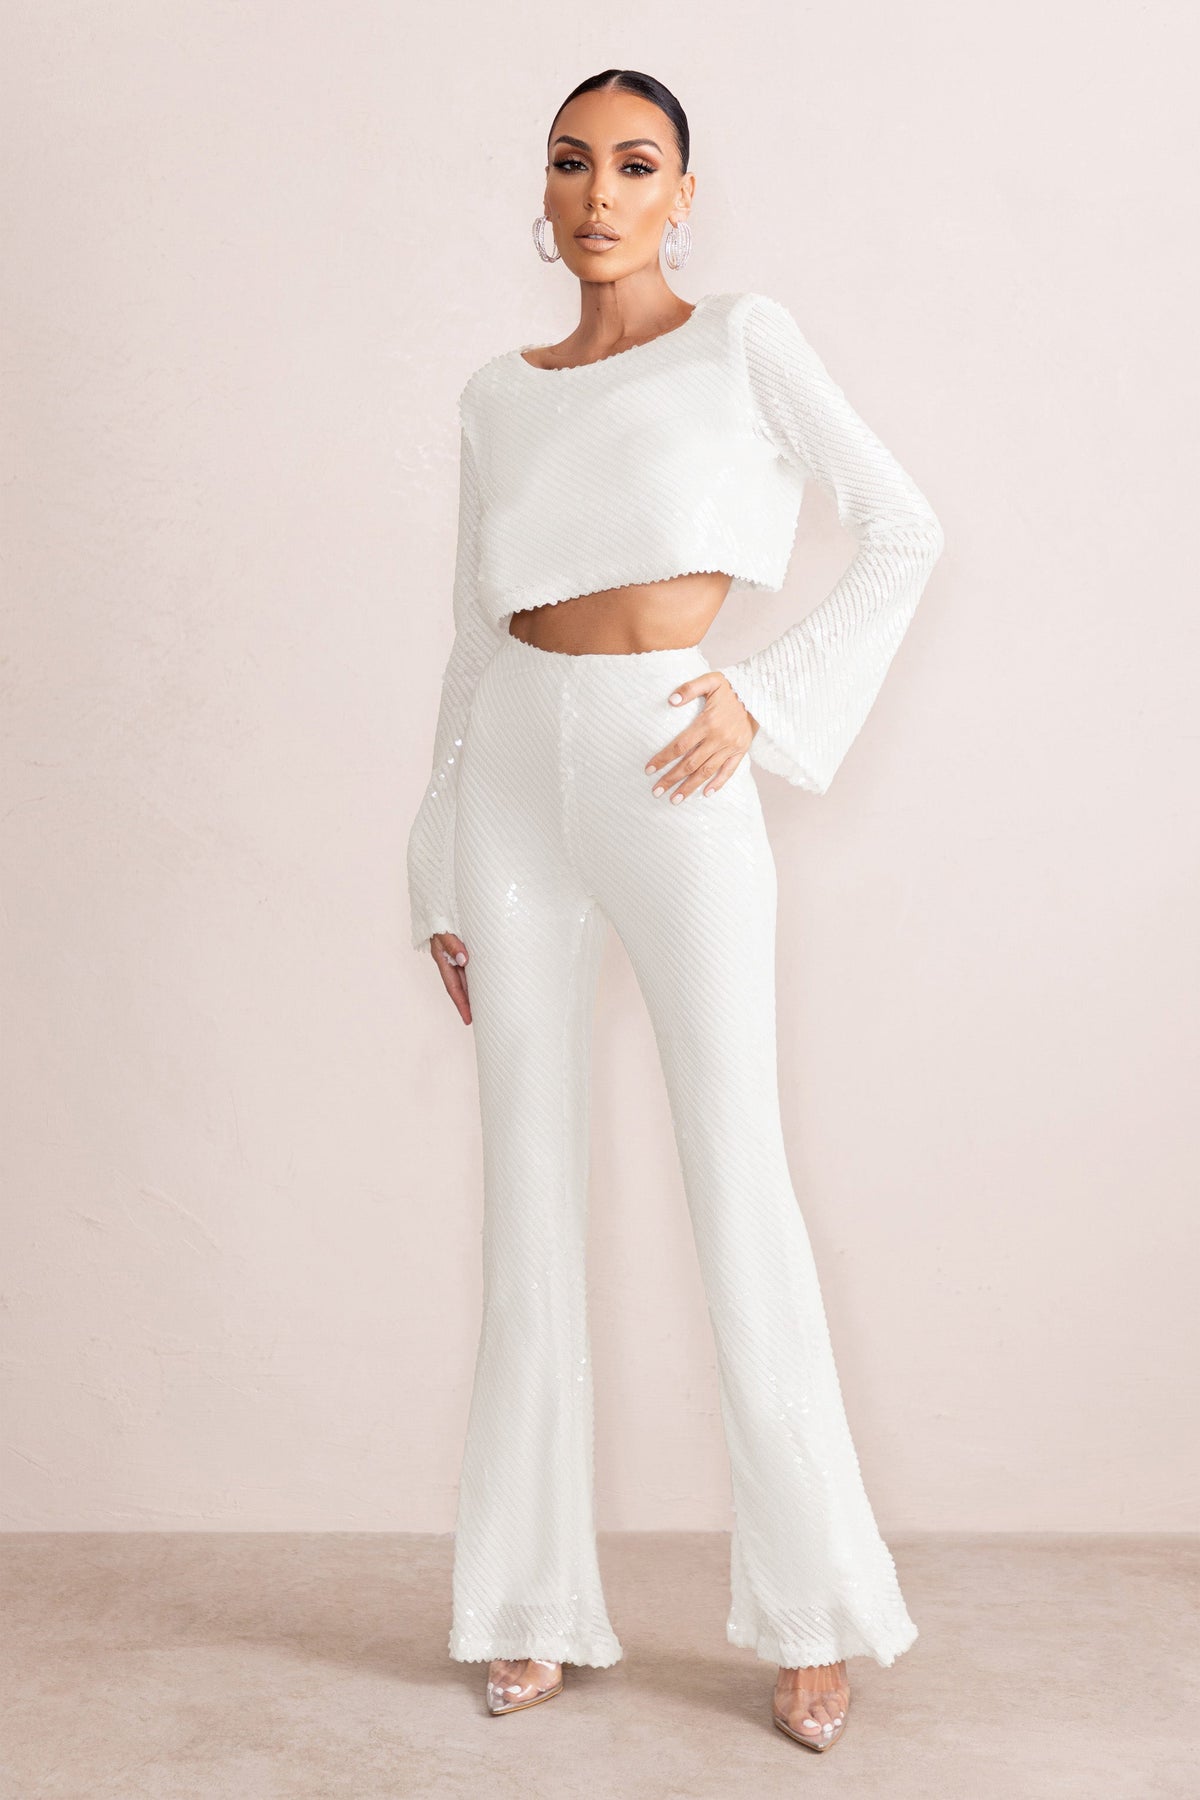 ASOS LUXE co-ord flared suit trousers in white | ASOS